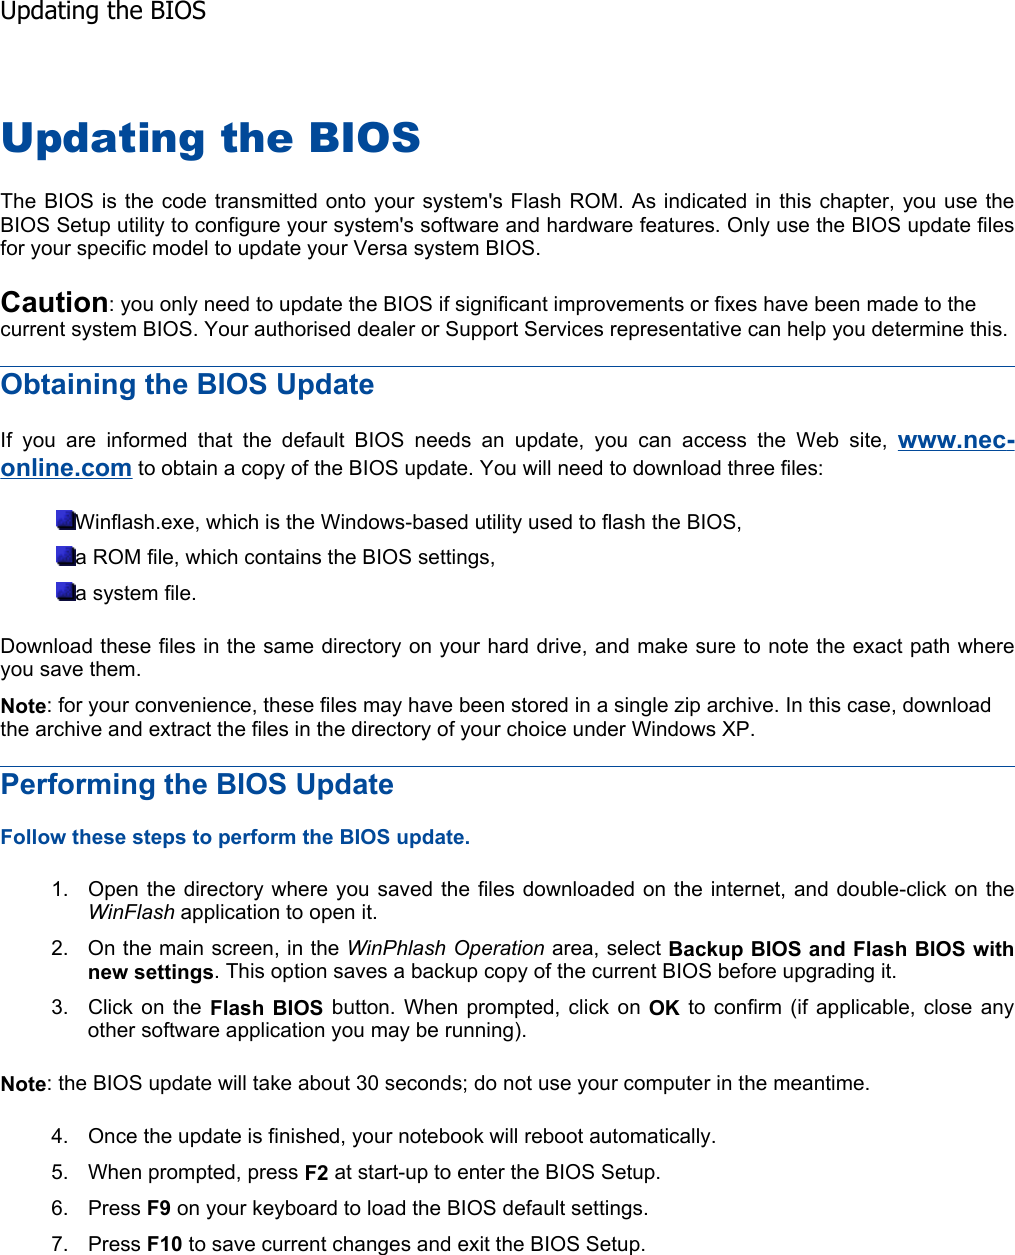 Updating the BIOS The BIOS is the code transmitted onto your system&apos;s Flash ROM. As indicated in this chapter, you use theBIOS Setup utility to configure your system&apos;s software and hardware features. Only use the BIOS update filesfor your specific model to update your Versa system BIOS. Caution: you only need to update the BIOS if significant improvements or fixes have been made to the current system BIOS. Your authorised dealer or Support Services representative can help you determine this. Obtaining the BIOS Update If you are informed that the default BIOS needs an update, you can access the Web site, www.nec-online.com to obtain a copy of the BIOS update. You will need to download three files: Winflash.exe, which is the Windows-based utility used to flash the BIOS, a ROM file, which contains the BIOS settings, a system file. Download these files in the same directory on your hard drive, and make sure to note the exact path whereyou save them. Note: for your convenience, these files may have been stored in a single zip archive. In this case, download the archive and extract the files in the directory of your choice under Windows XP. Performing the BIOS Update Follow these steps to perform the BIOS update. 1. Open the directory where you saved the files downloaded on the internet, and double-click on the WinFlash application to open it. 2. On the main screen, in the WinPhlash Operation area, select Backup BIOS and Flash BIOS with new settings. This option saves a backup copy of the current BIOS before upgrading it. 3. Click on the Flash BIOS button. When prompted, click on OK to confirm (if applicable, close any other software application you may be running). Note: the BIOS update will take about 30 seconds; do not use your computer in the meantime. 4. Once the update is finished, your notebook will reboot automatically.5. When prompted, press F2 at start-up to enter the BIOS Setup. 6. Press F9 on your keyboard to load the BIOS default settings. 7. Press F10 to save current changes and exit the BIOS Setup.    Updating the BIOS